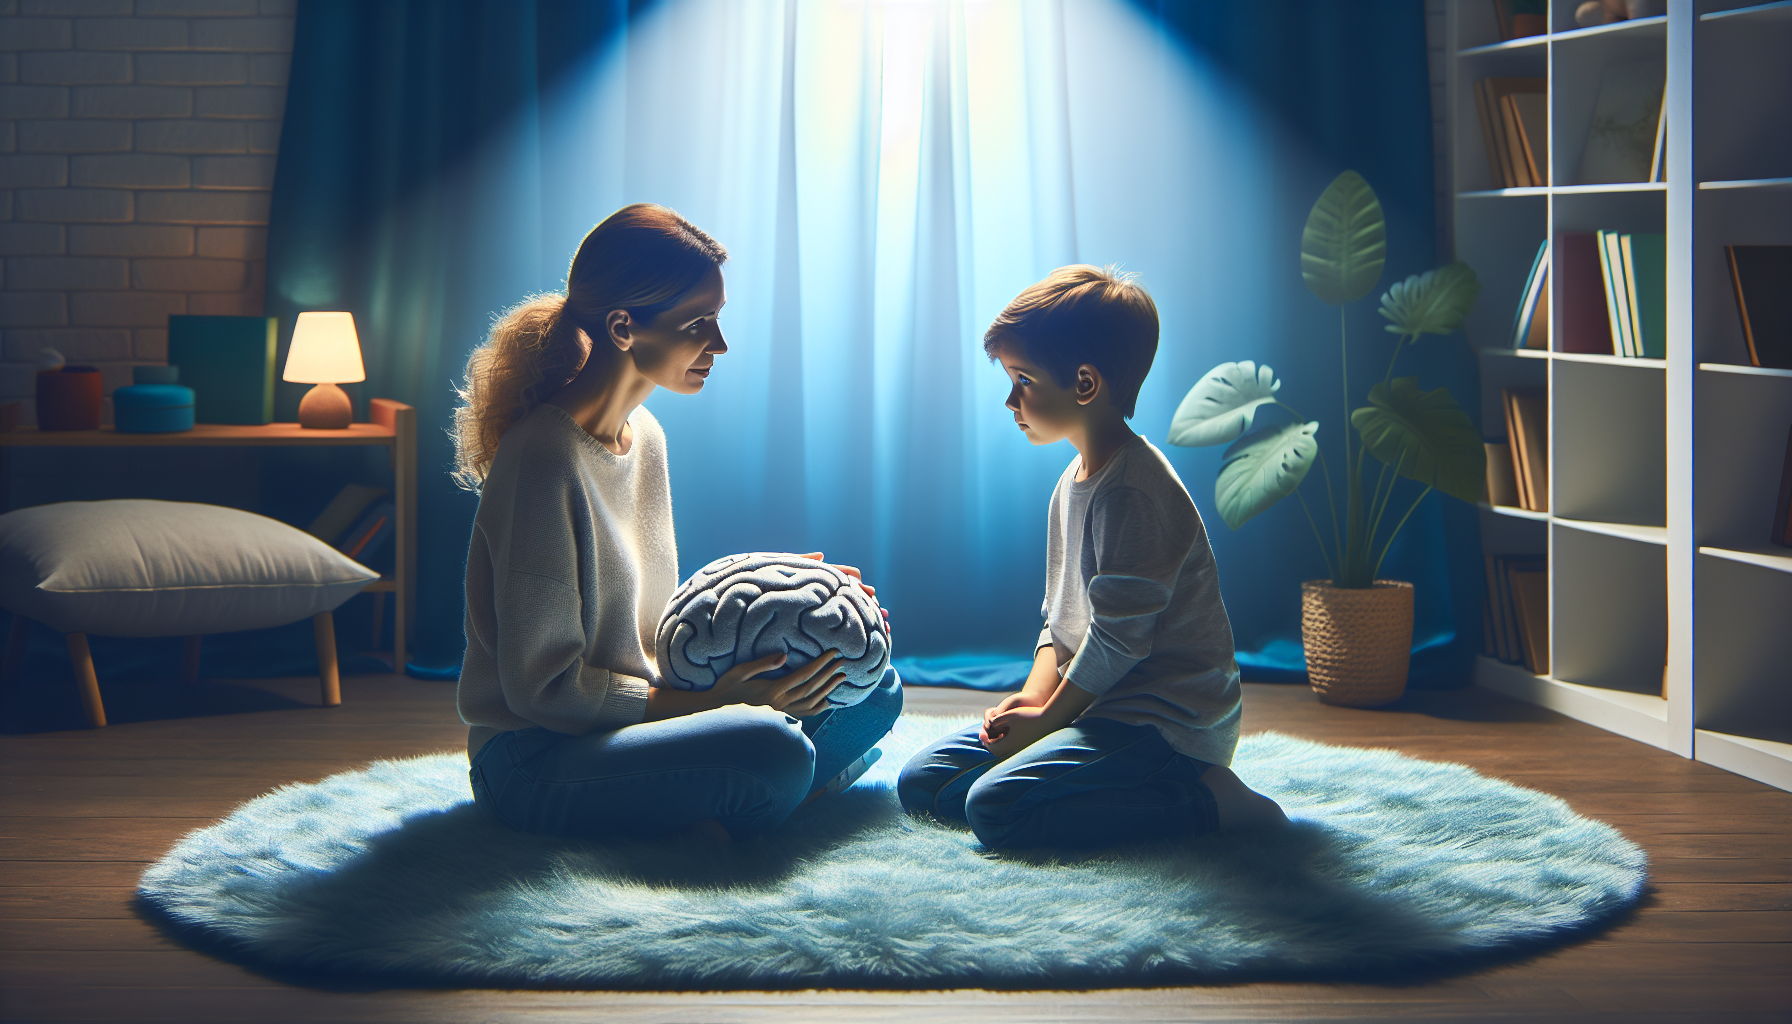 Illustration of a parent educating their child about mental health and trauma prevention